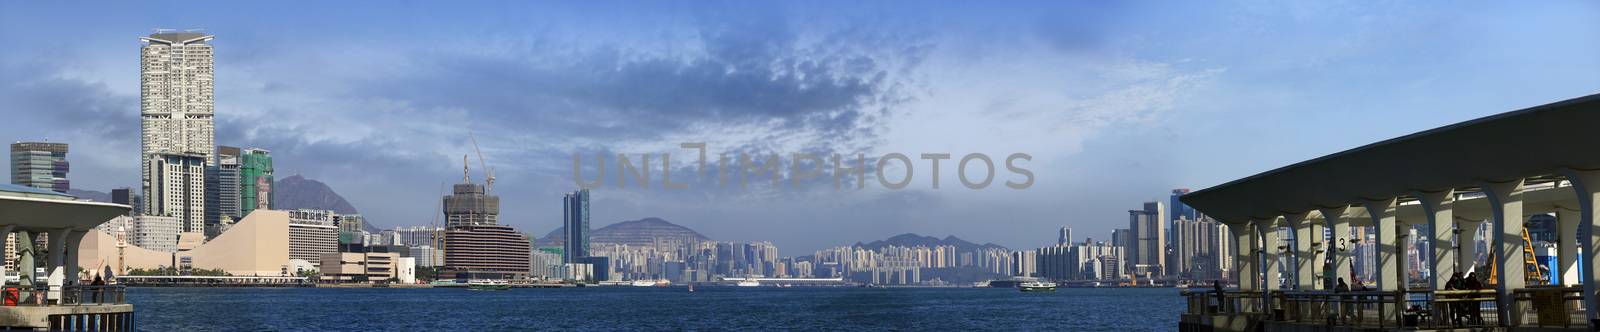 Hong Kong, Hong Kong S.A.R. - JENUARY 29, 2014: Star ferry crossing the Victoria Harbor with a view of Hong Kong Island skyline in the background.